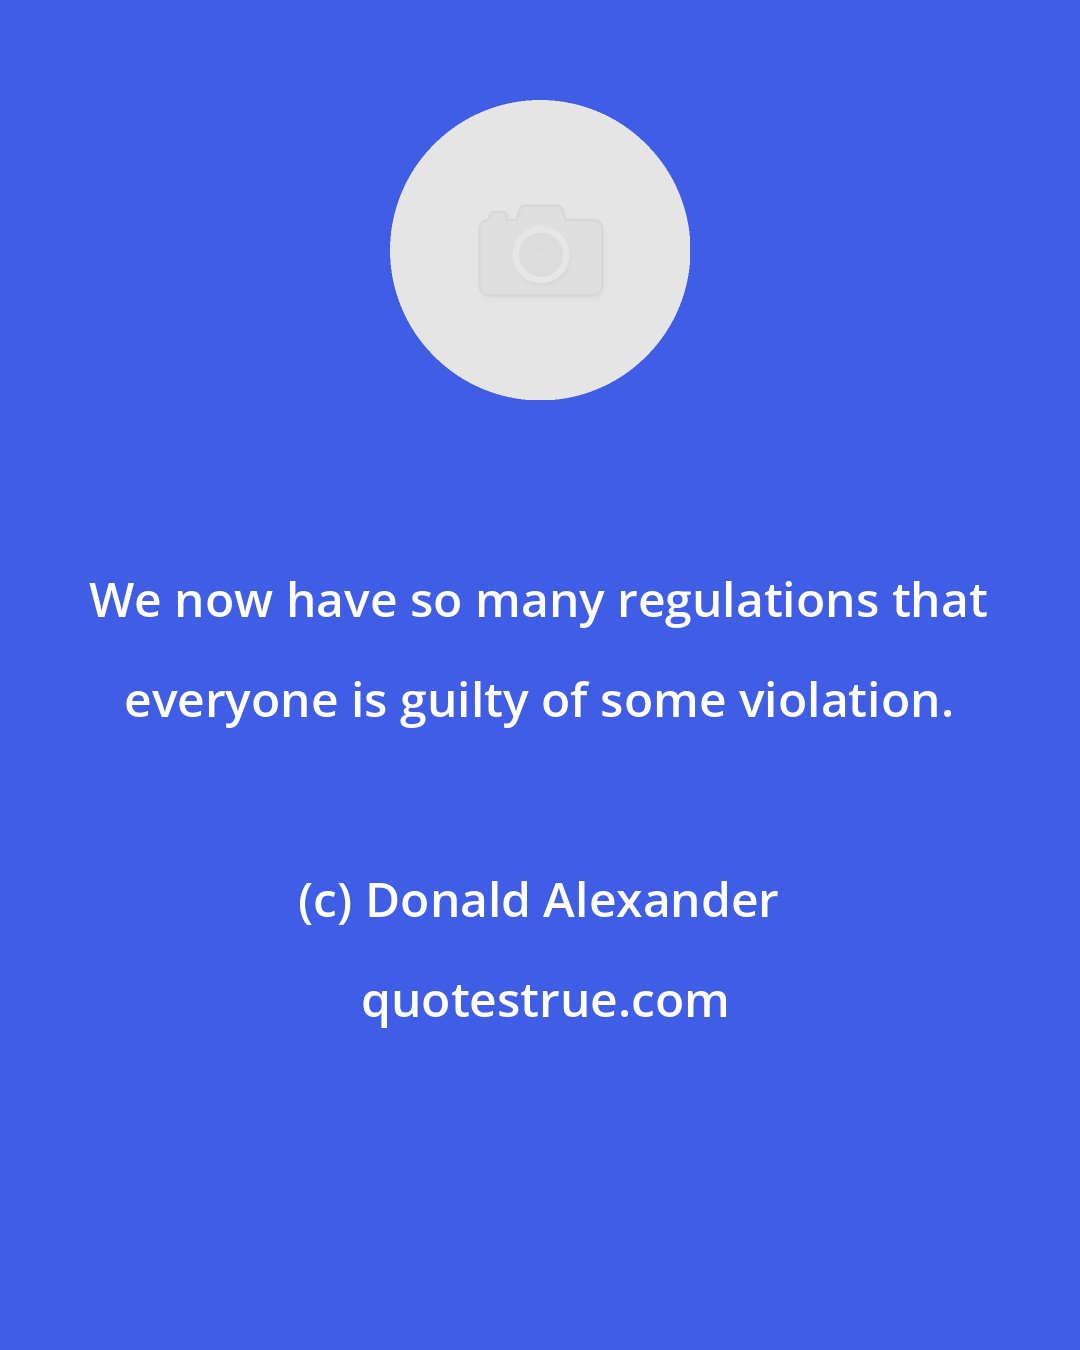 Donald Alexander: We now have so many regulations that everyone is guilty of some violation.